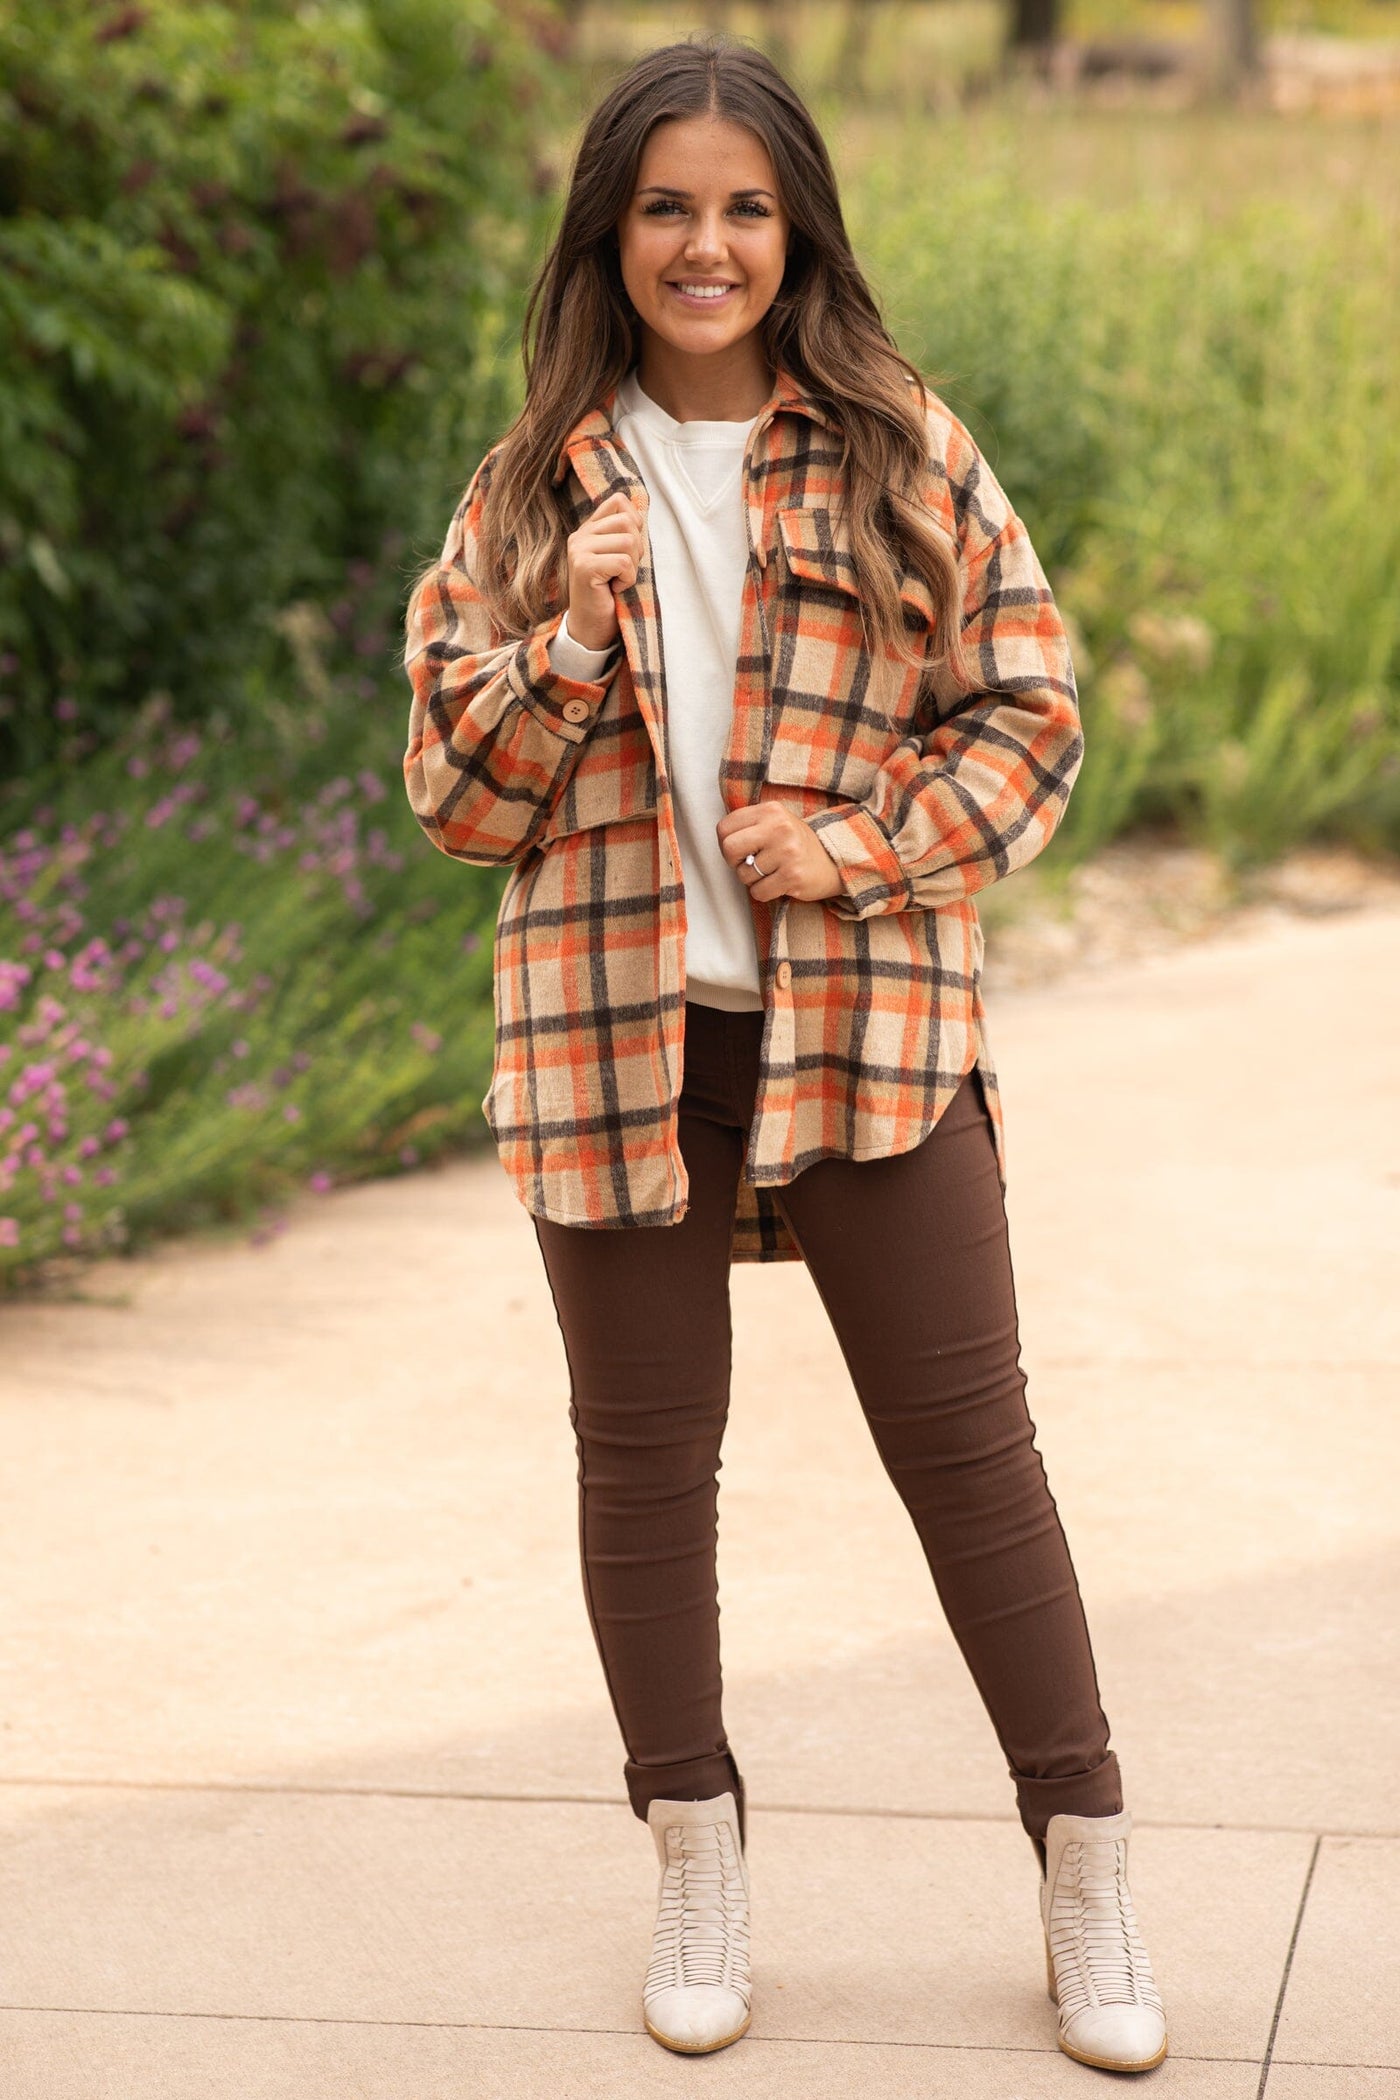 Orange and Tan Plaid Shacket - Filly Flair